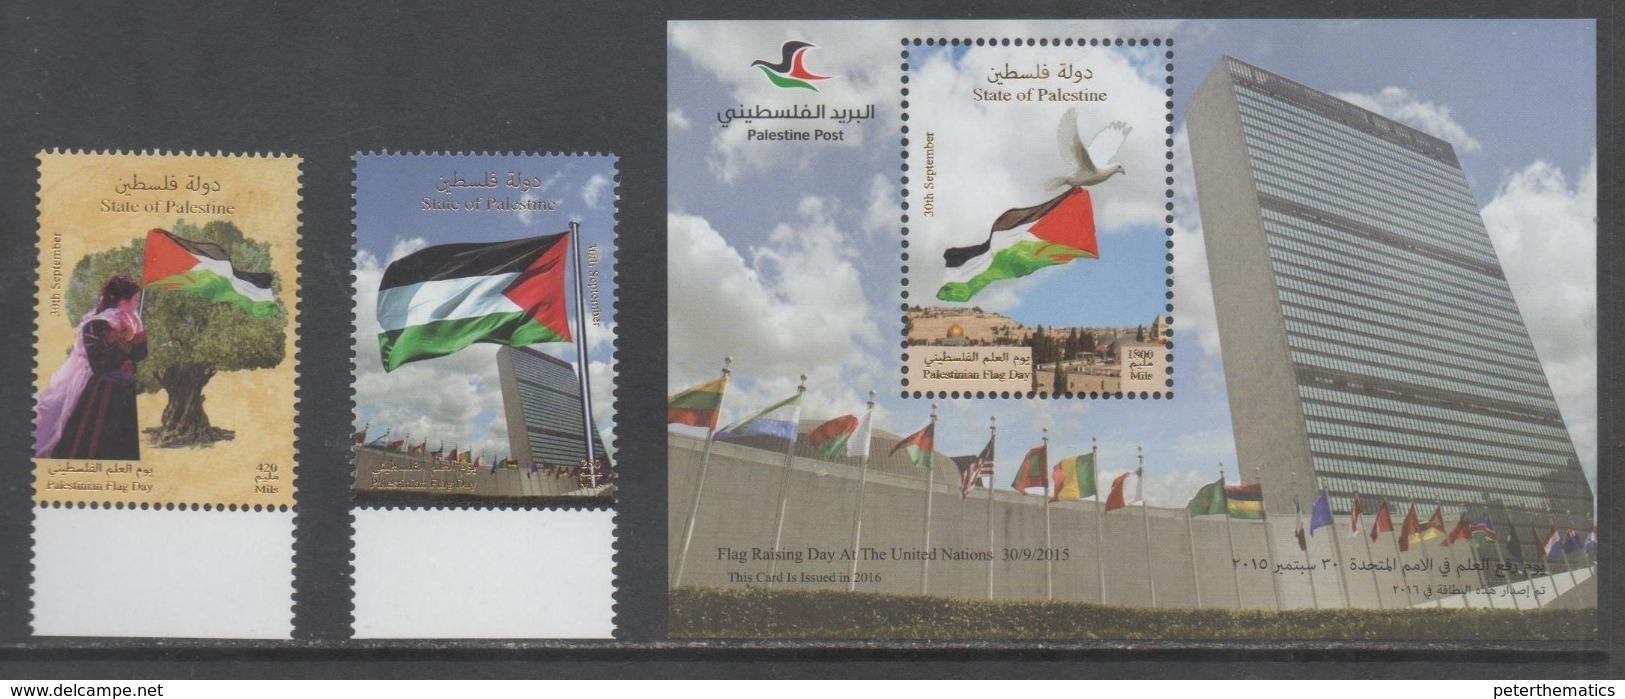 PALESTINE , 2016, PALESTINIAN FLAG DAY, TREES, UN, 2v+ GOLD FOIL S/SHEET - Timbres